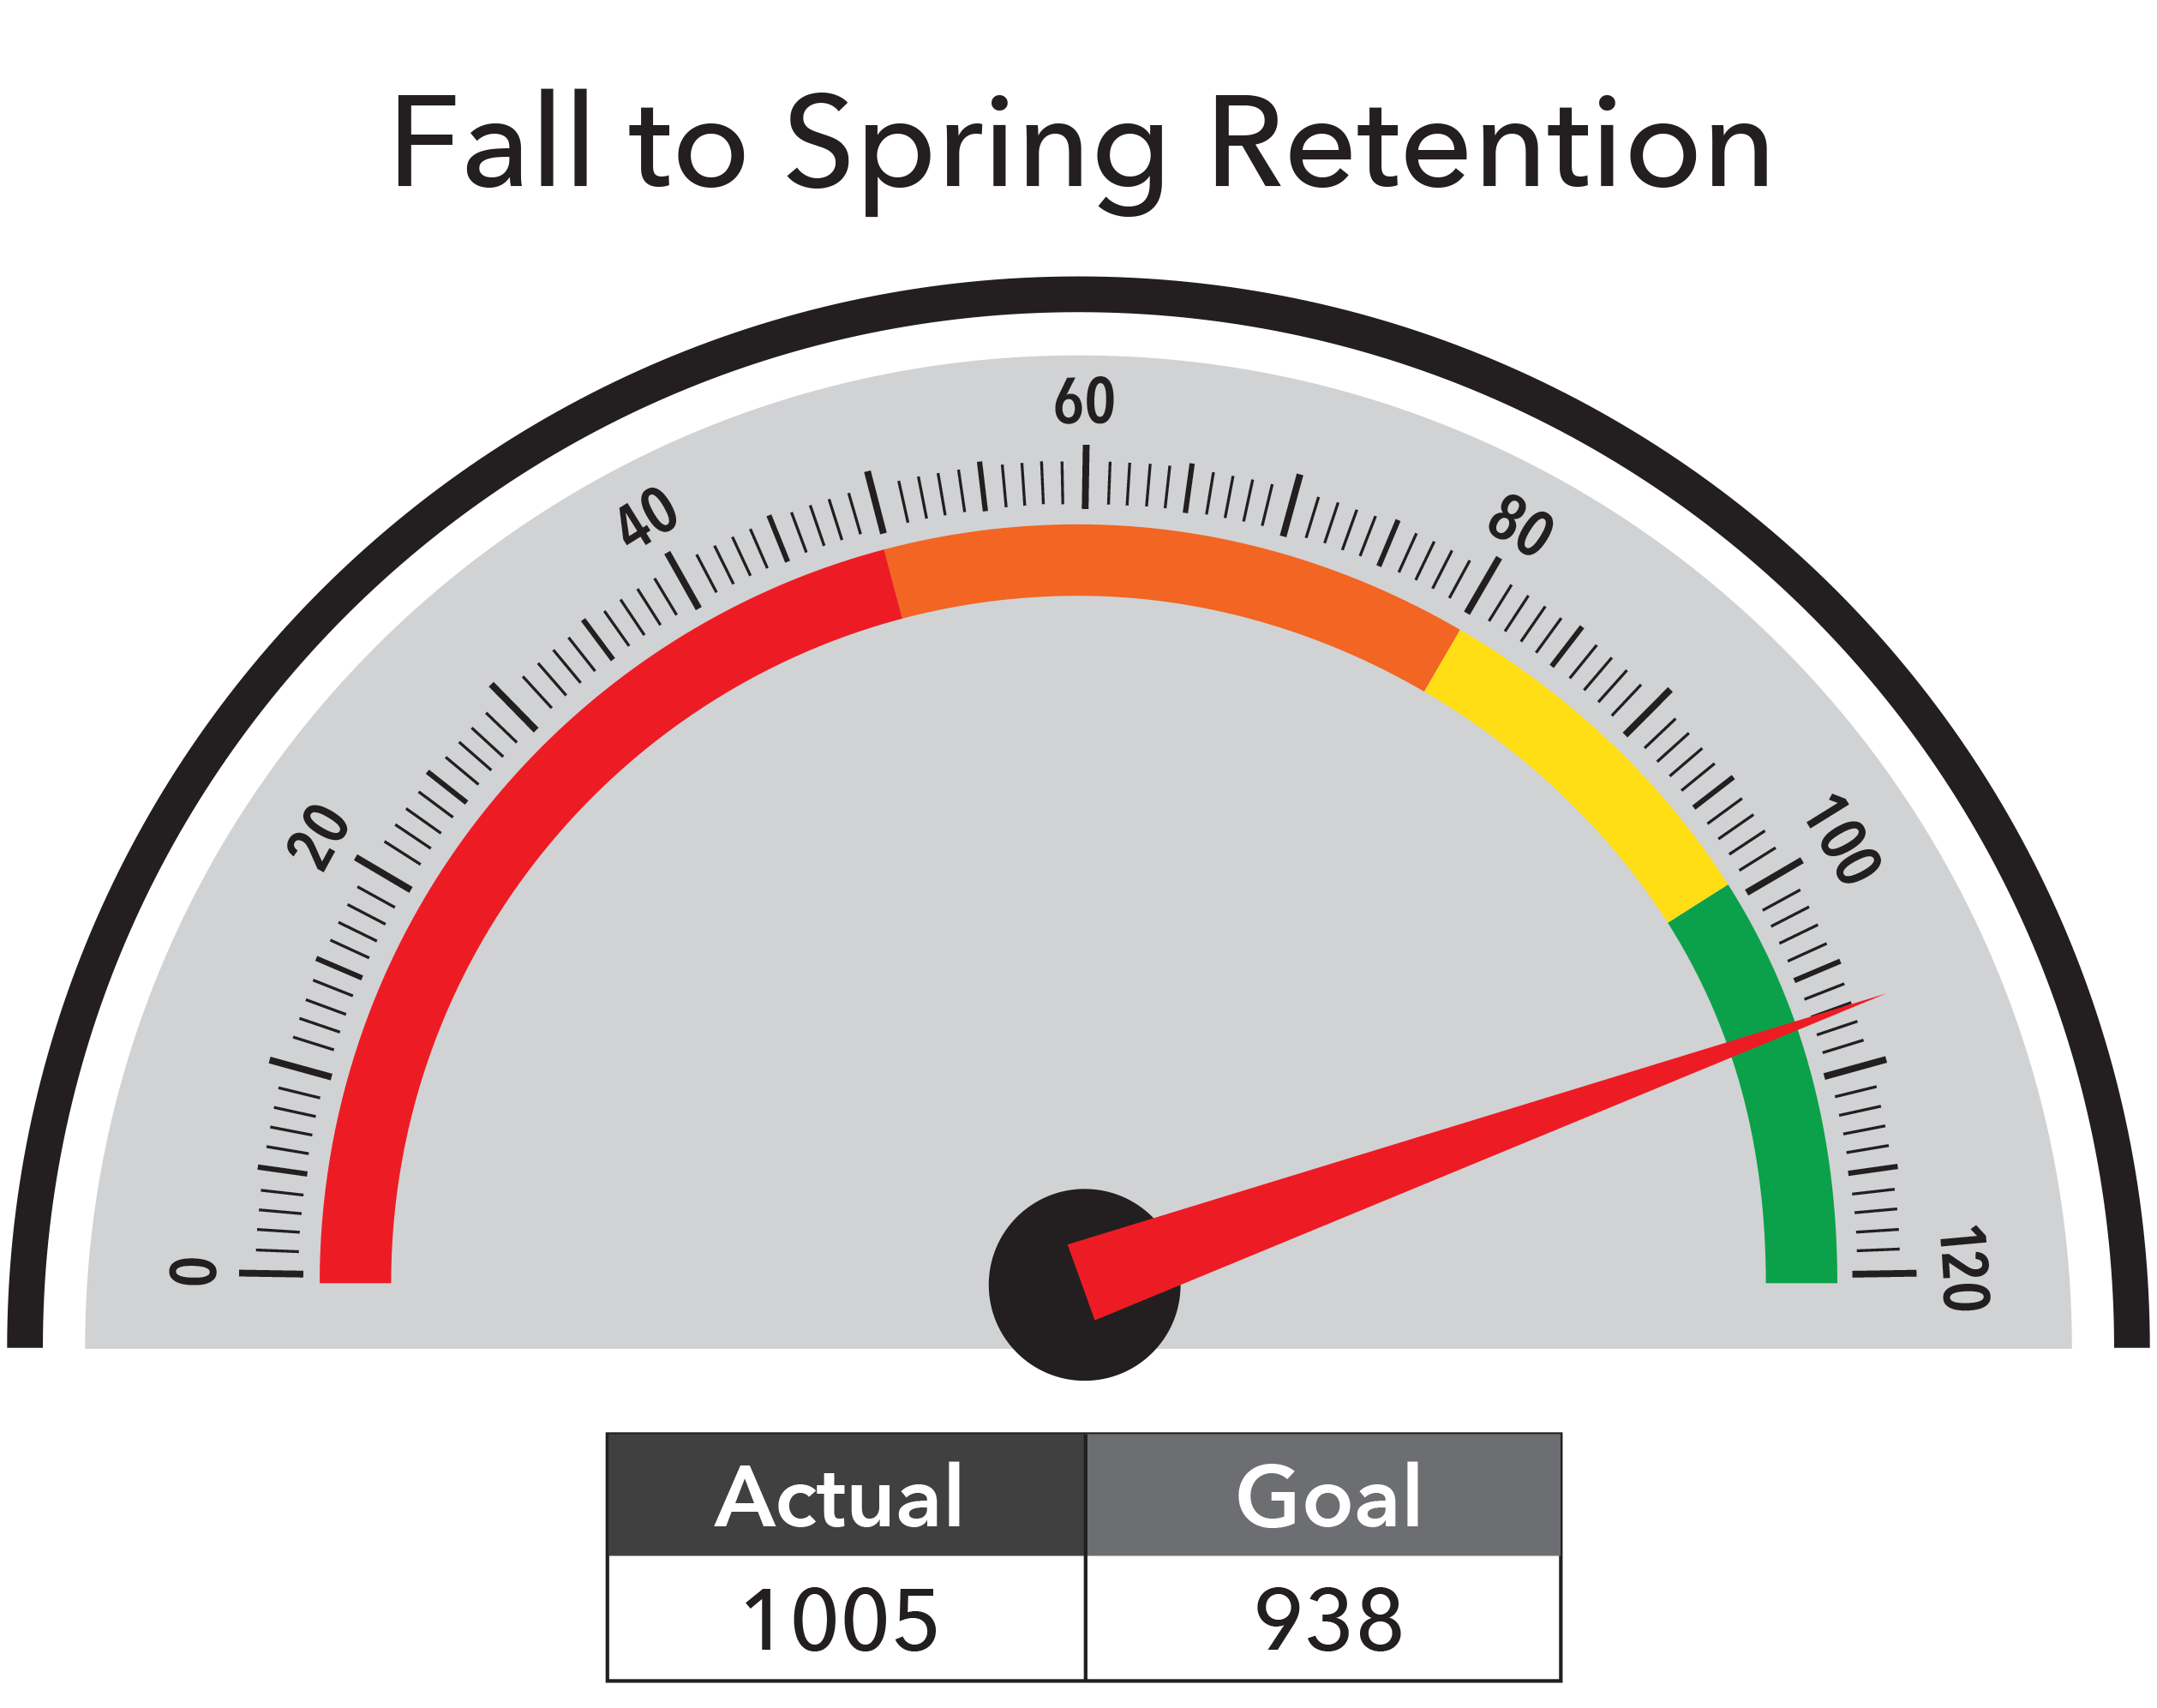 Fall to Spring Retention - Actual 1005, Goal 938